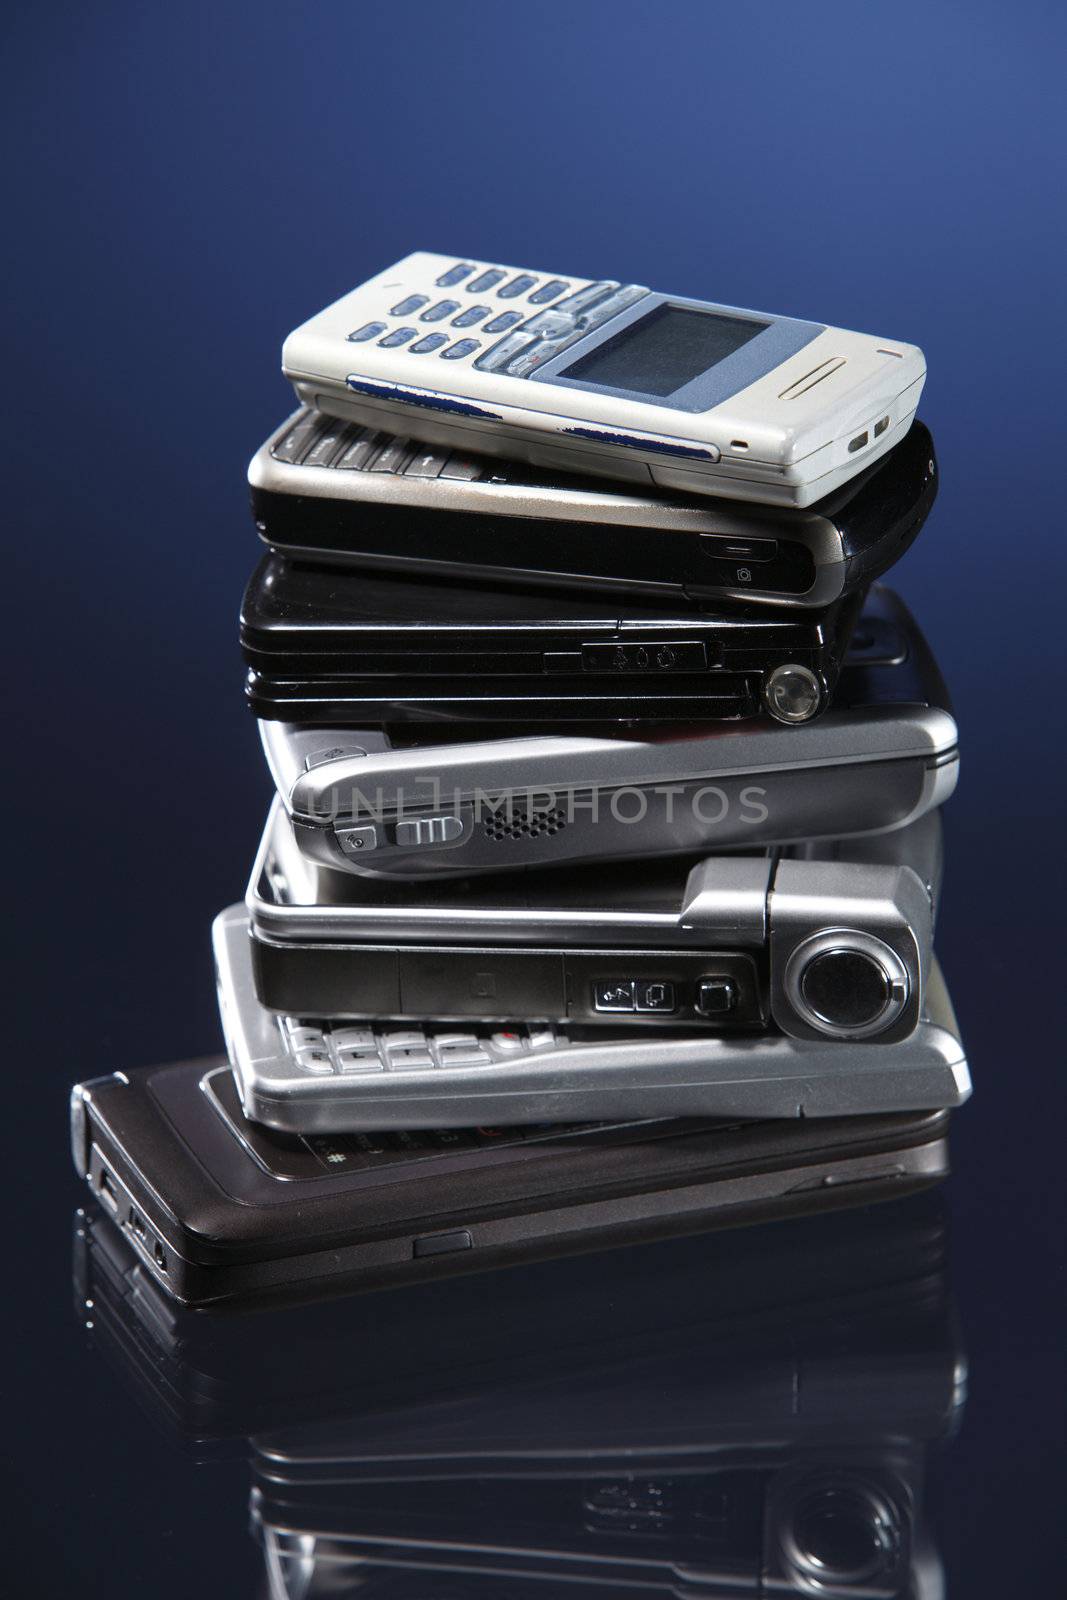 stock image of the mobile phone